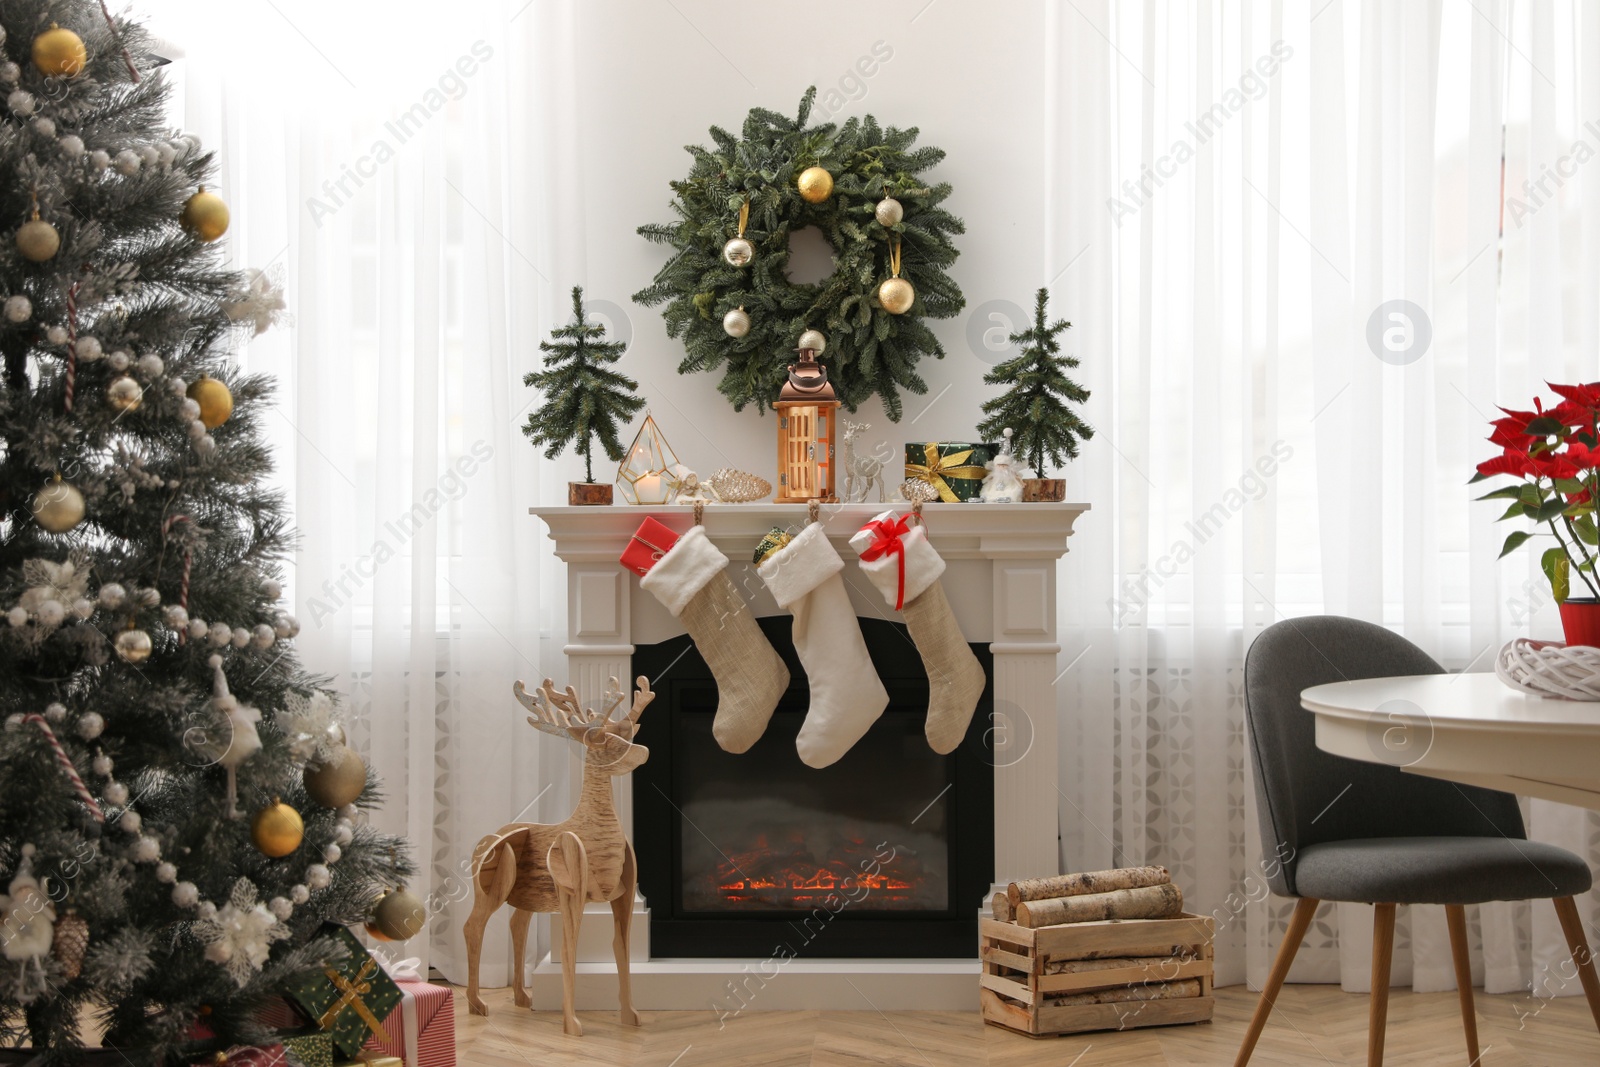 Photo of Fireplace in room with Christmas decorations. Interior design